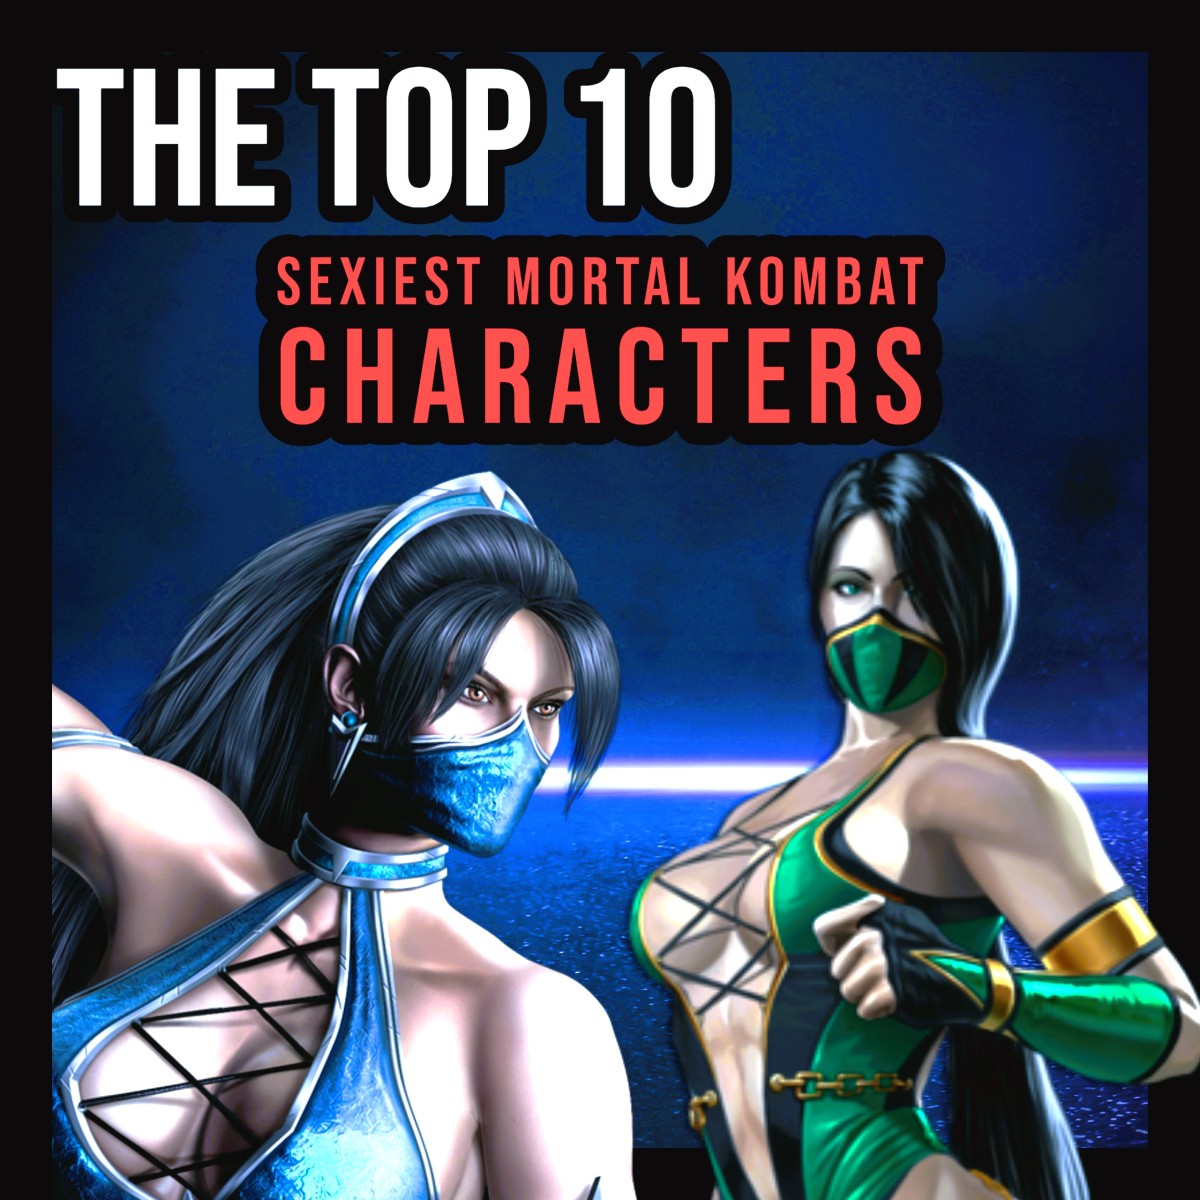 The Top 10 Sexiest Mortal Kombat Characters